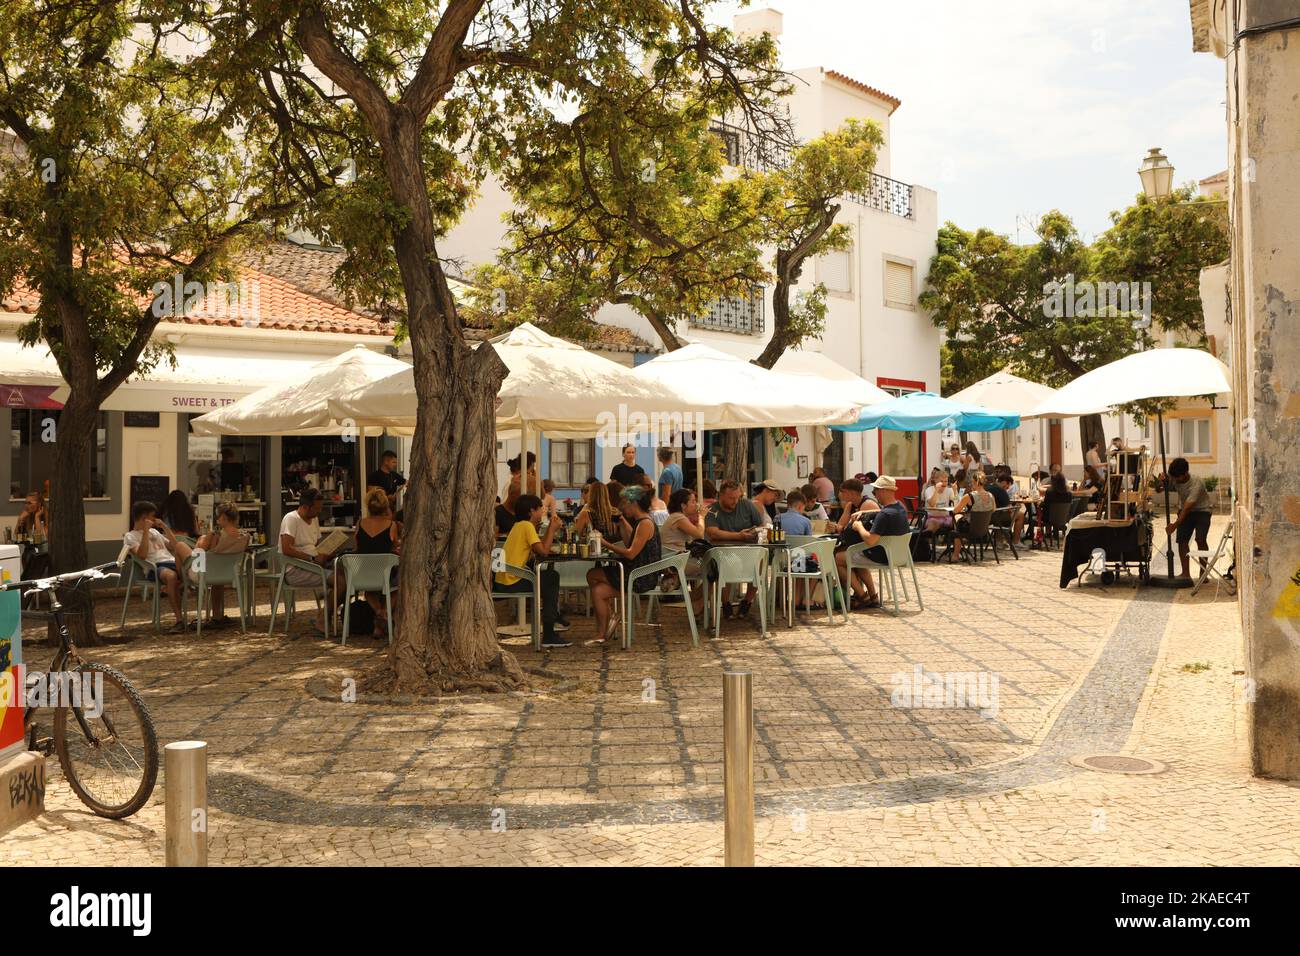 People sitting under umbrellas outside a cafe, Lagos, Algarve, Portugal Stock Photo